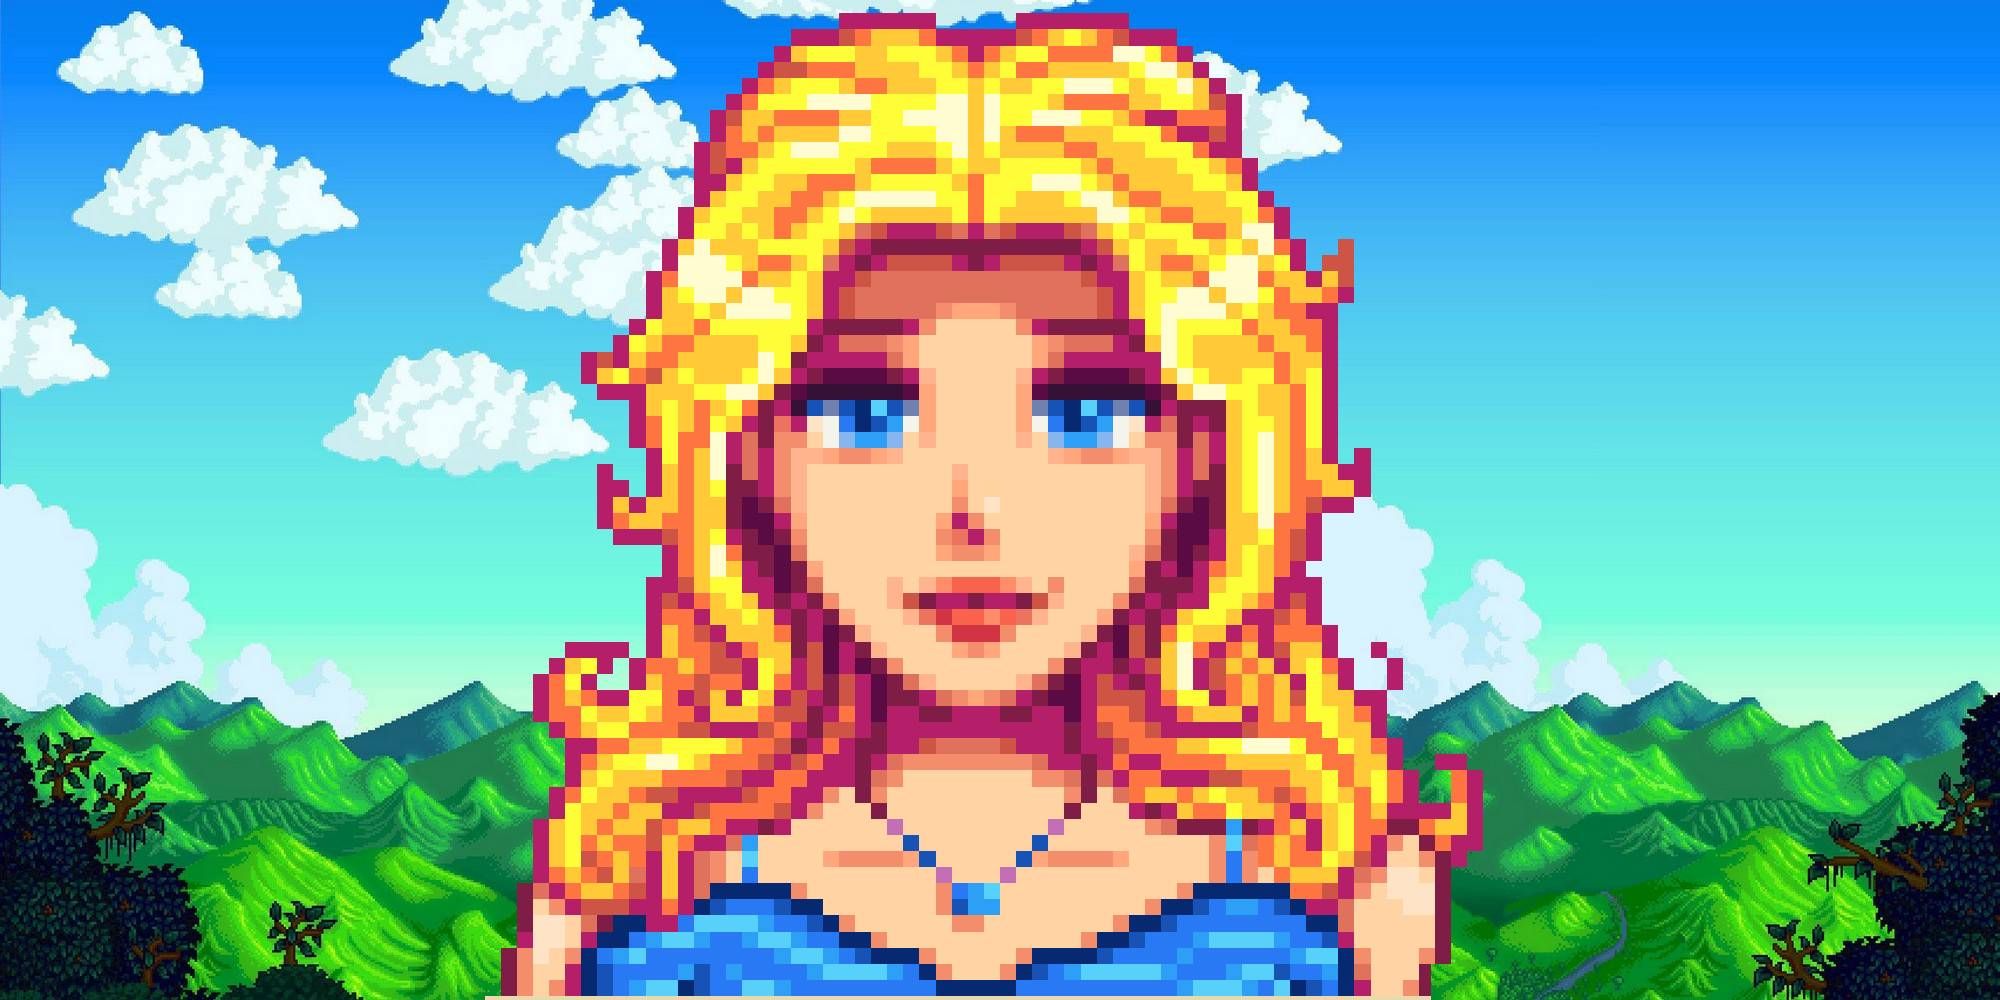 haley on the stardew valley title background marriage